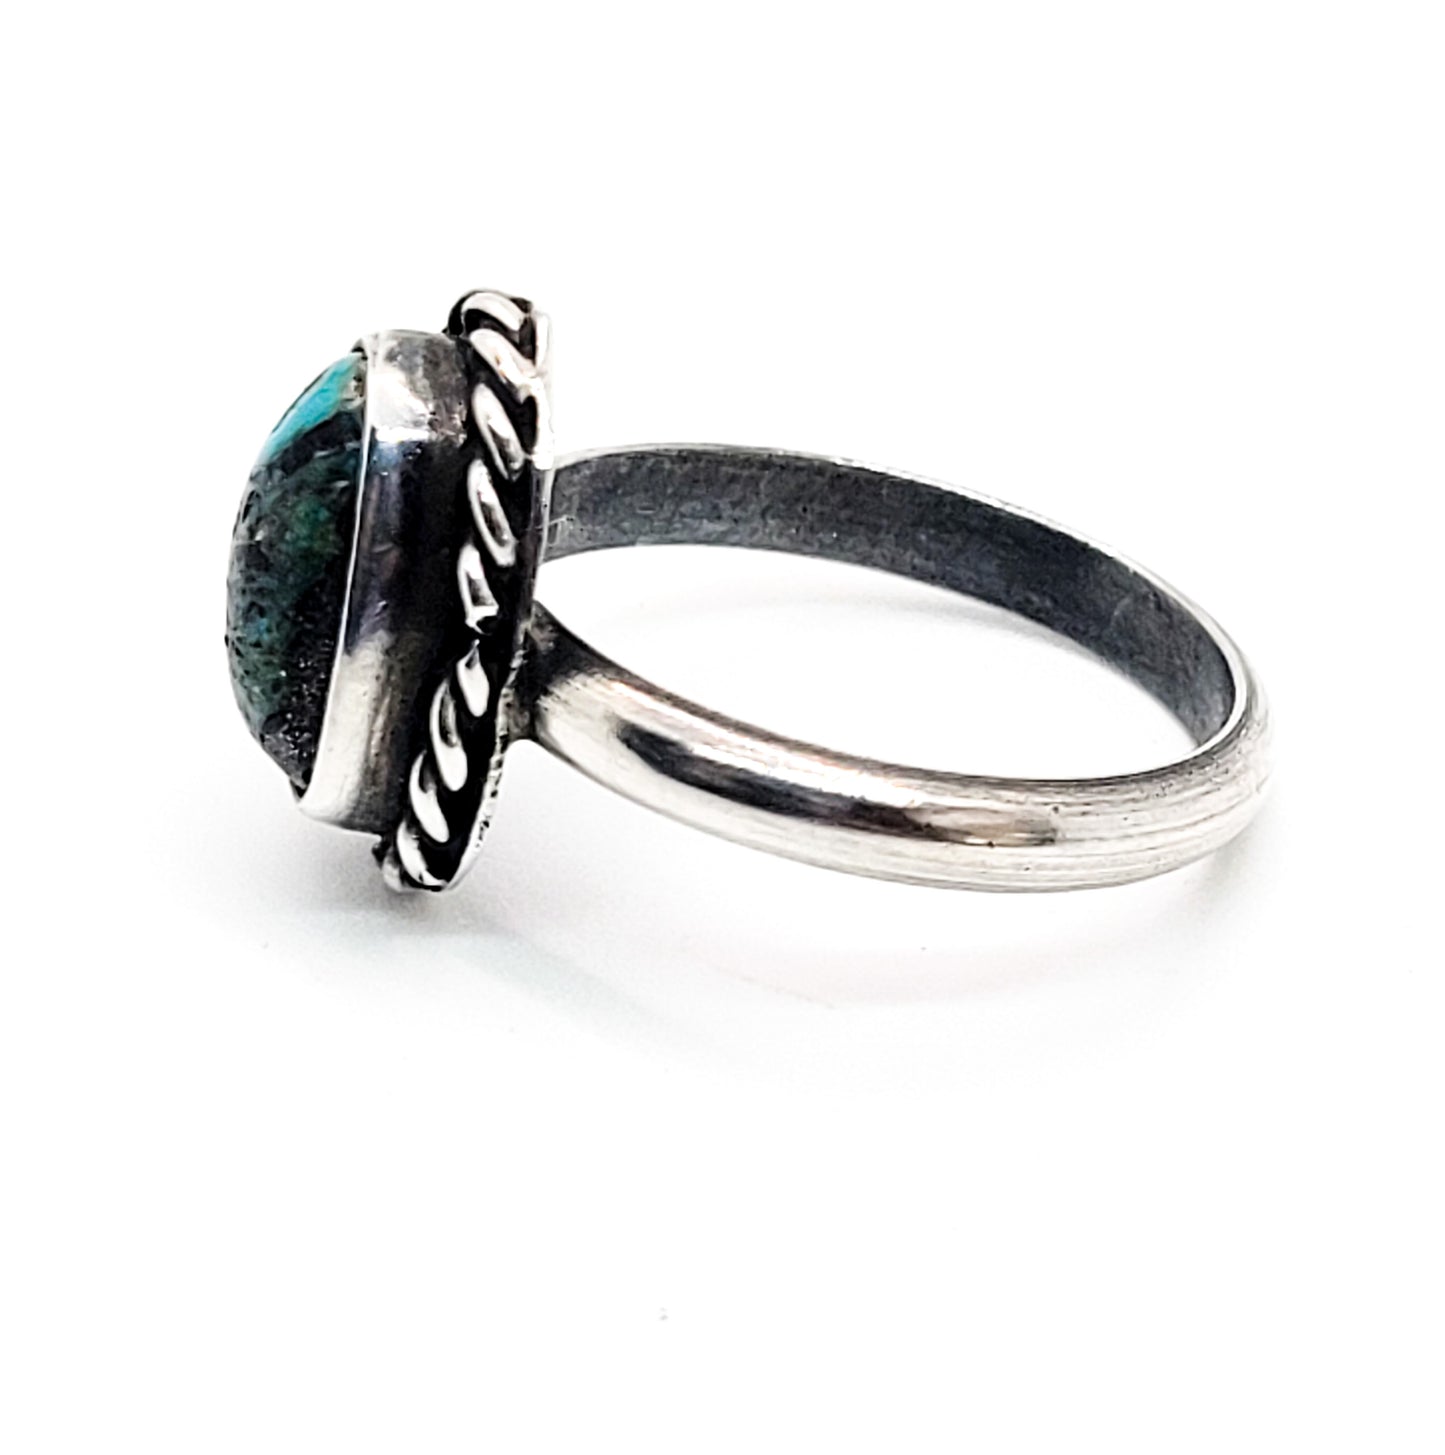 Turquoise Native American small twisted rope sterling silver gemstone ring size 5.5